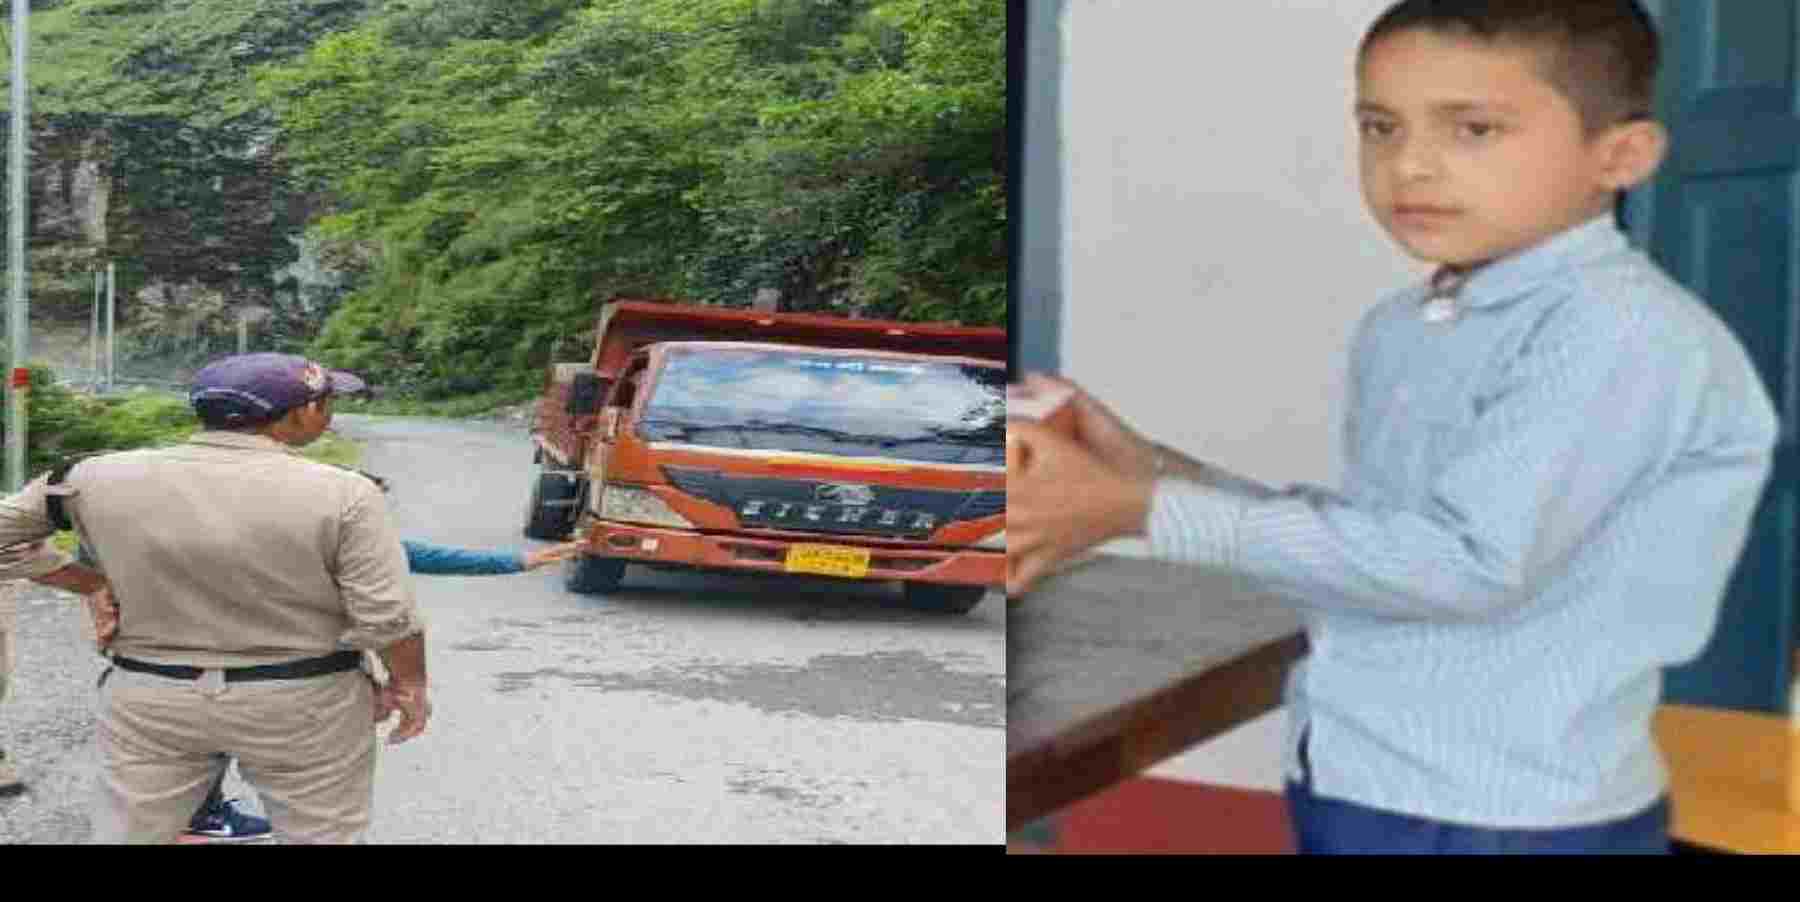 Uttarakhand news: Fifth clas students himanshu Singh road accident in lohaghat CHAMPAWAT